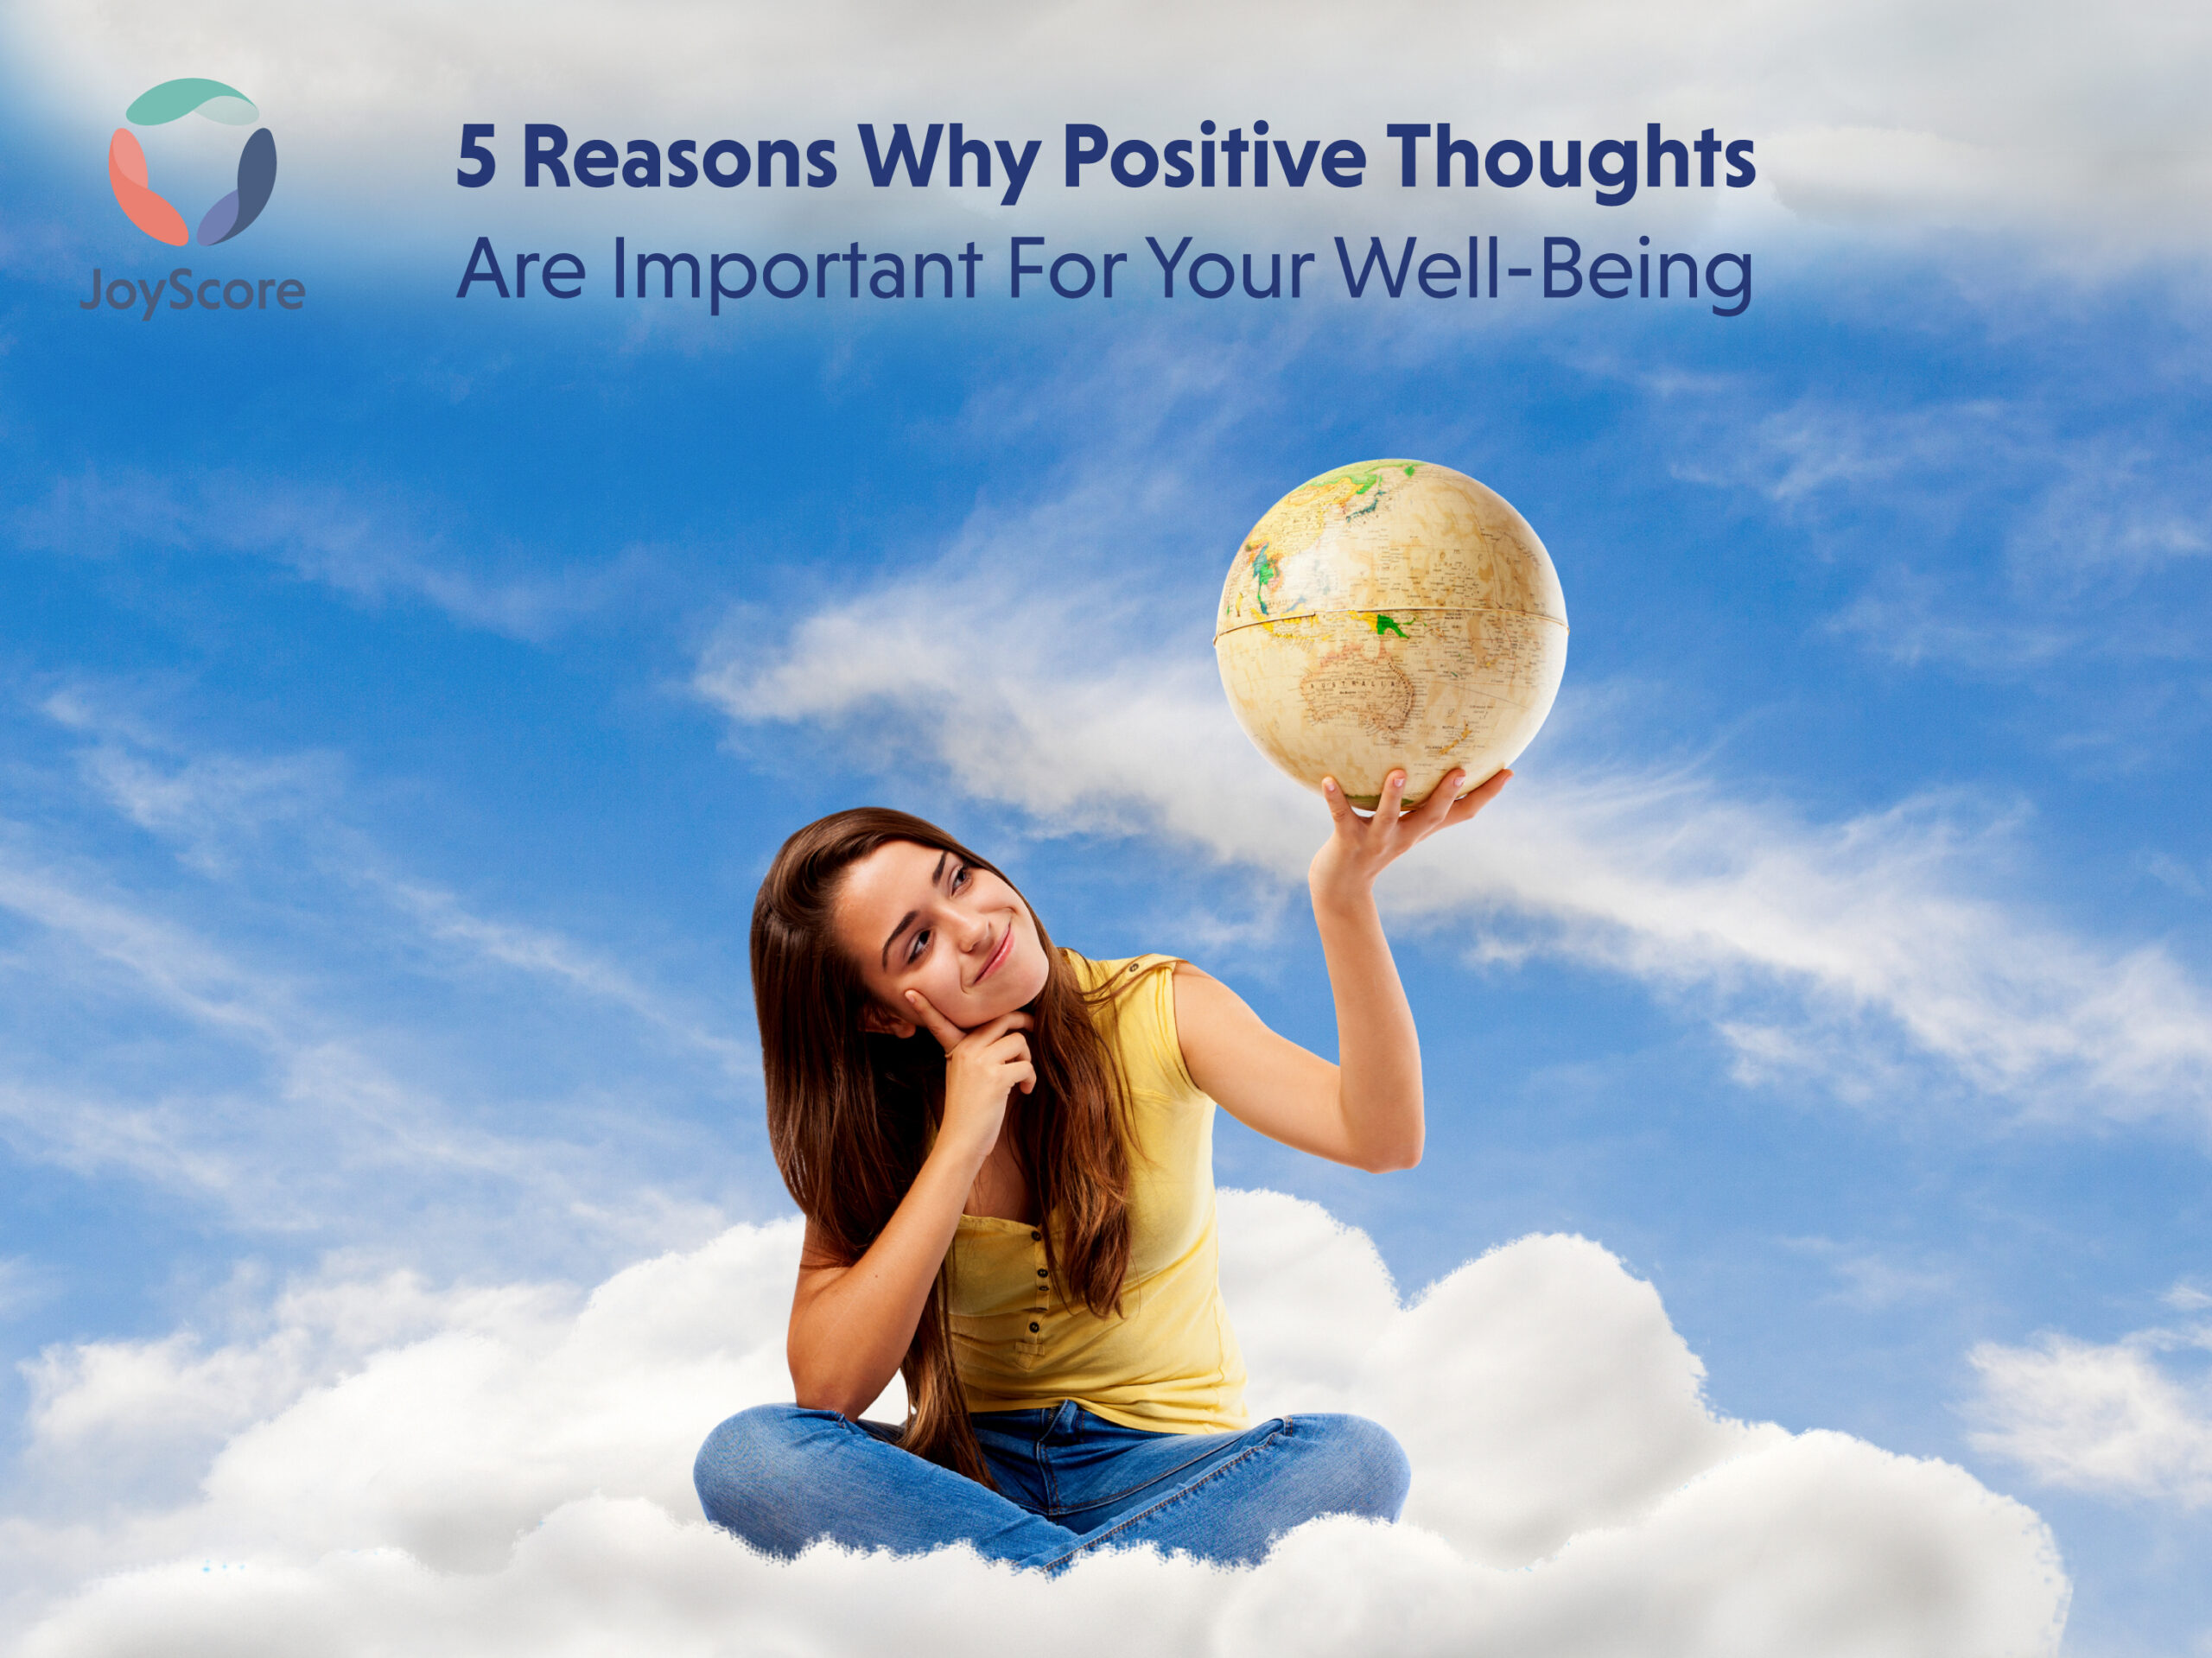 5 Reasons Why Positive Thoughts are Important for Your Well-being